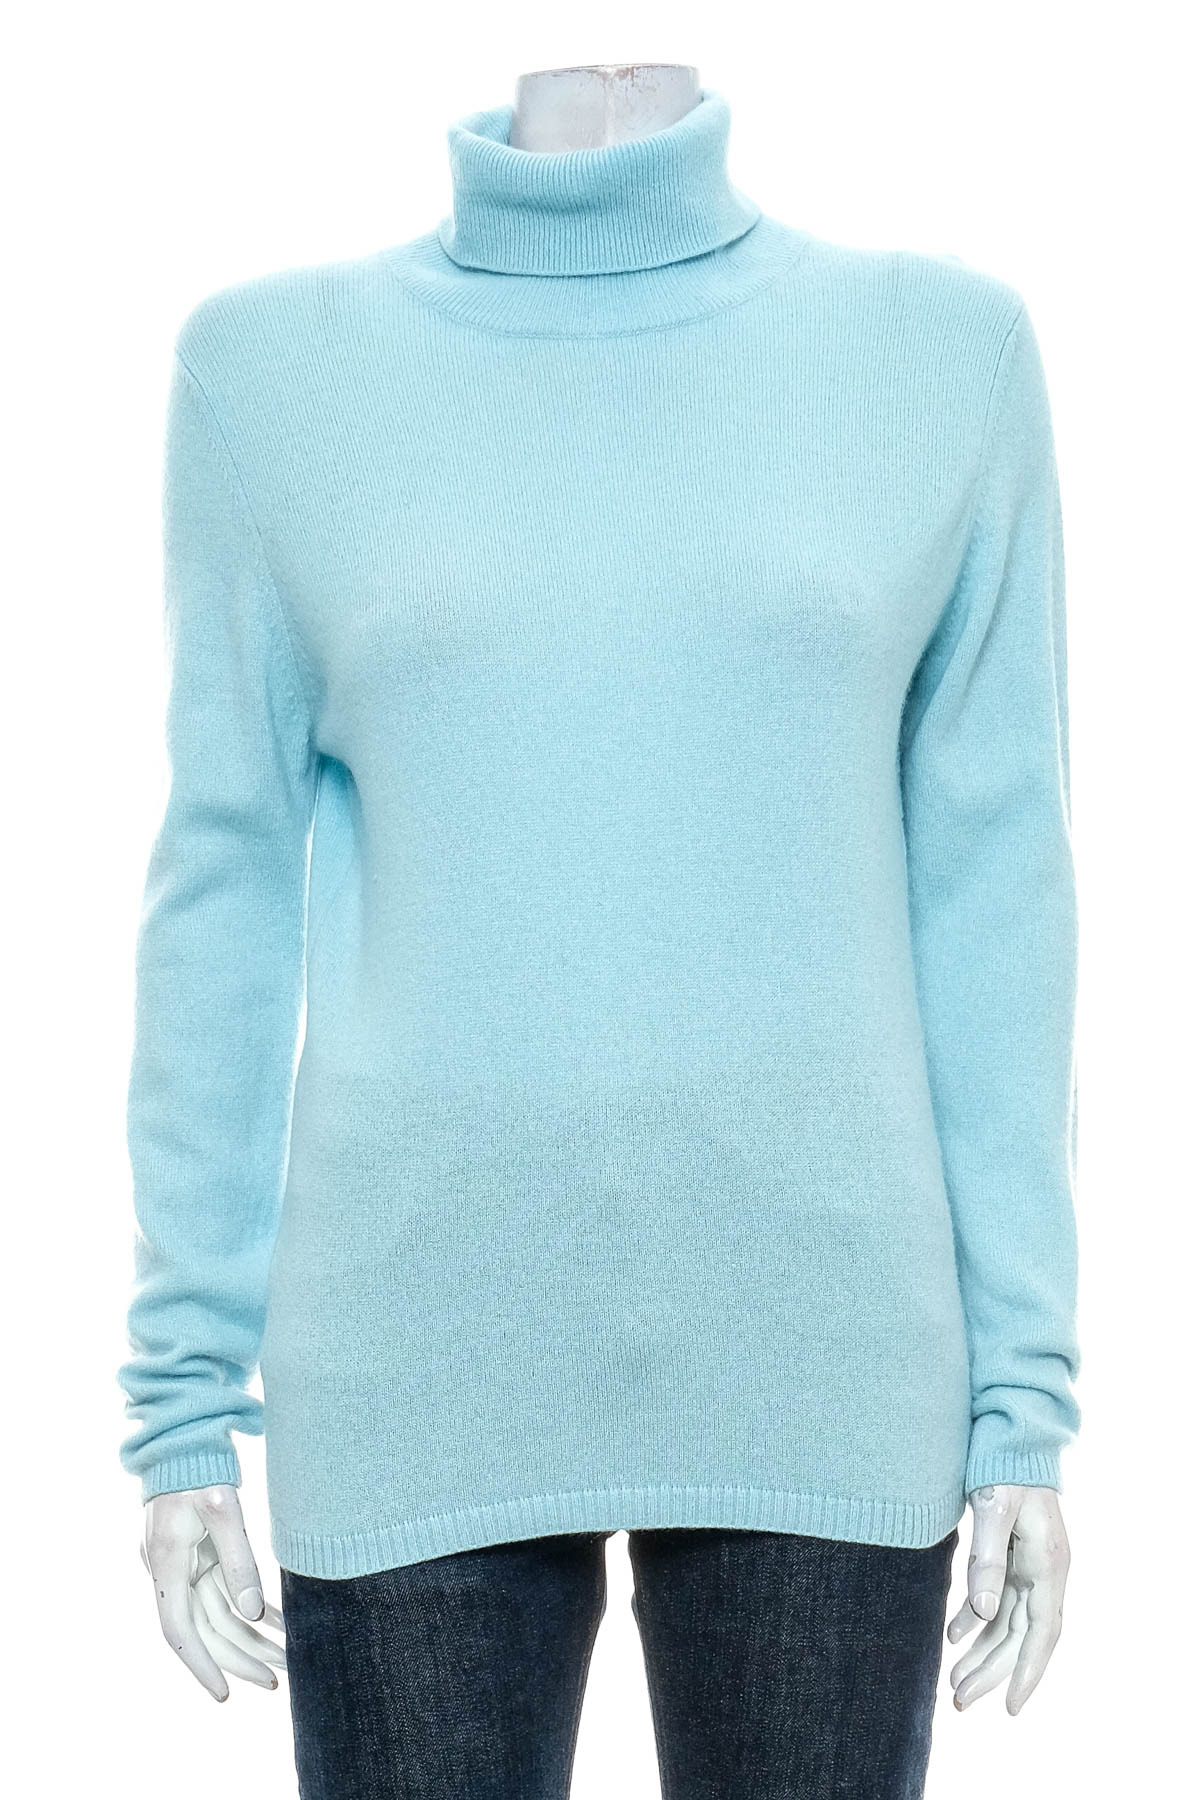 Women's sweater - Iy cashmere - 0